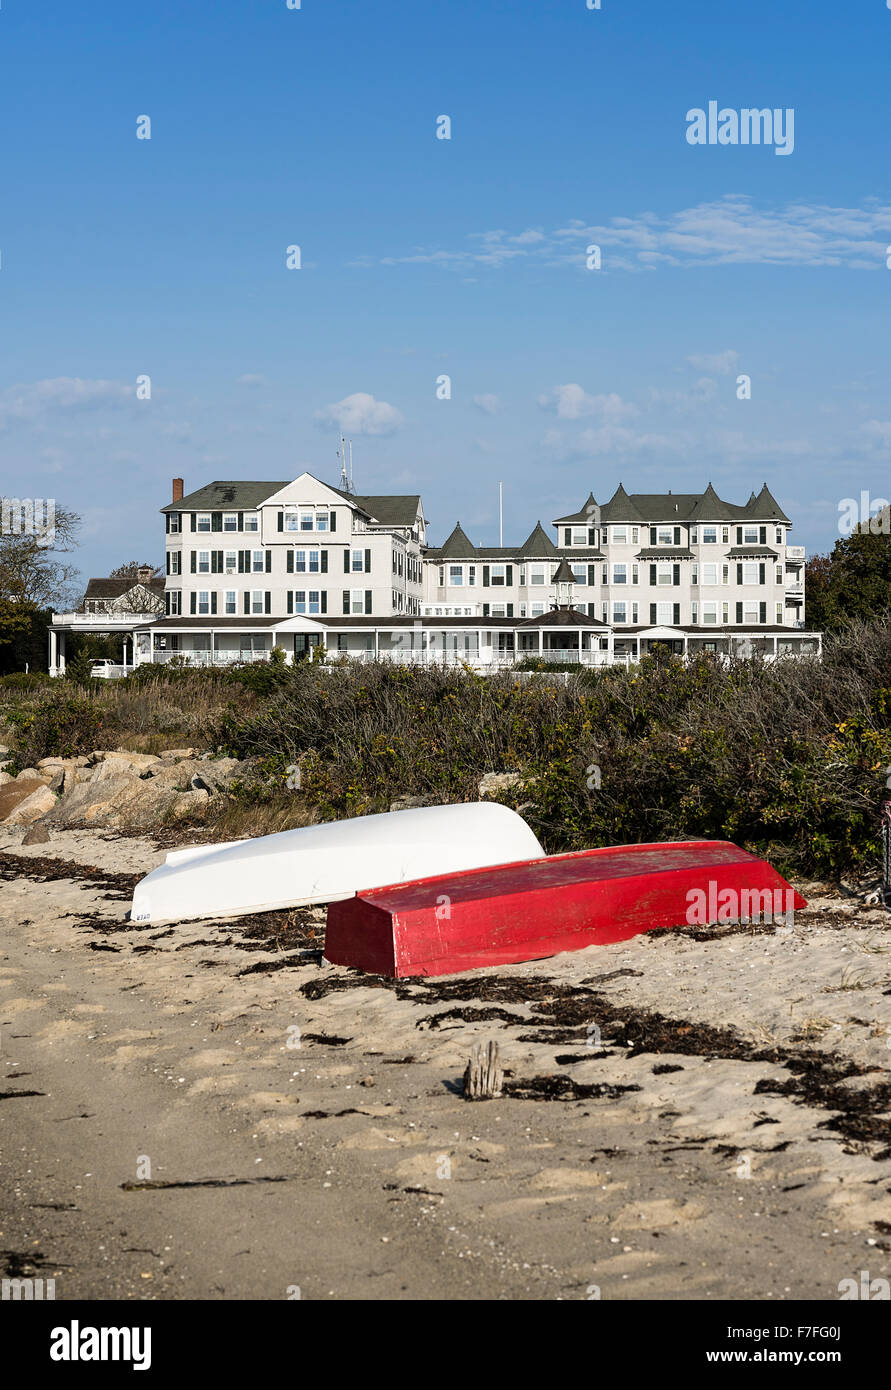 Harbour View Hotel, Falmouth, Martha's Vineyard, Massachusetts, USA Banque D'Images